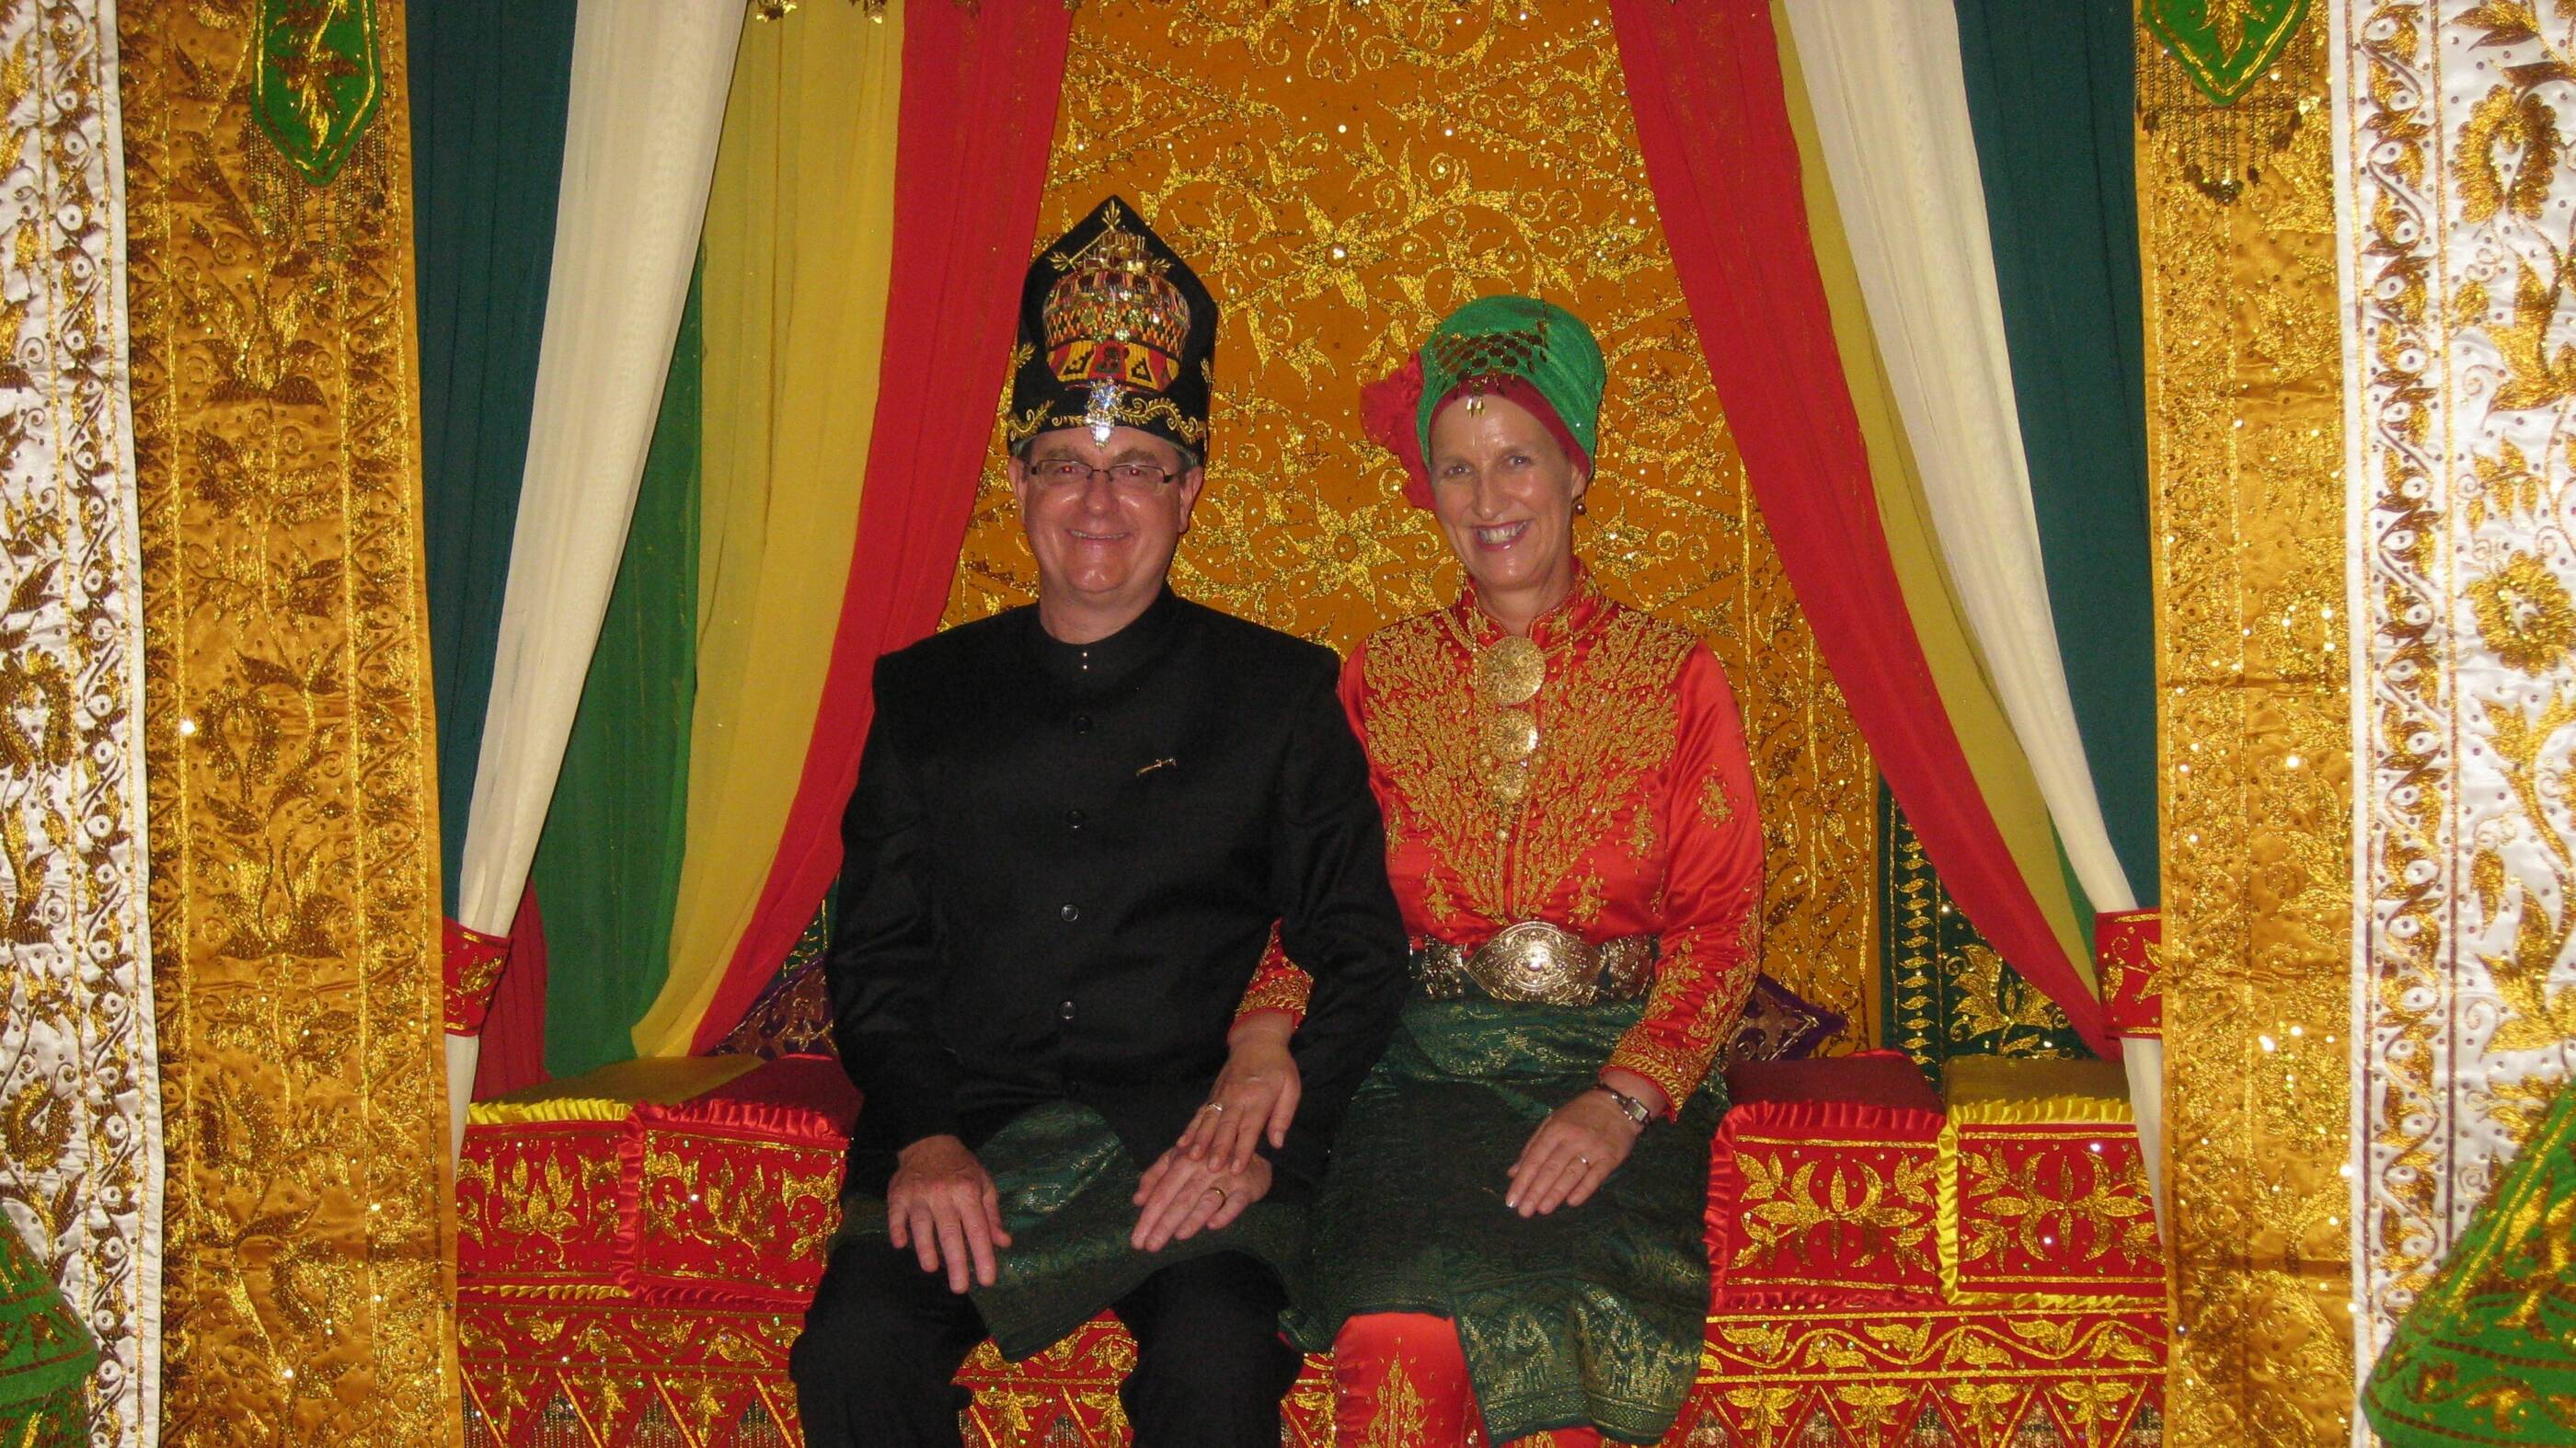 Richard and his wife Jenny, who has been a crucial partner to Richard throughout his career, in traditional dress in Indonesia